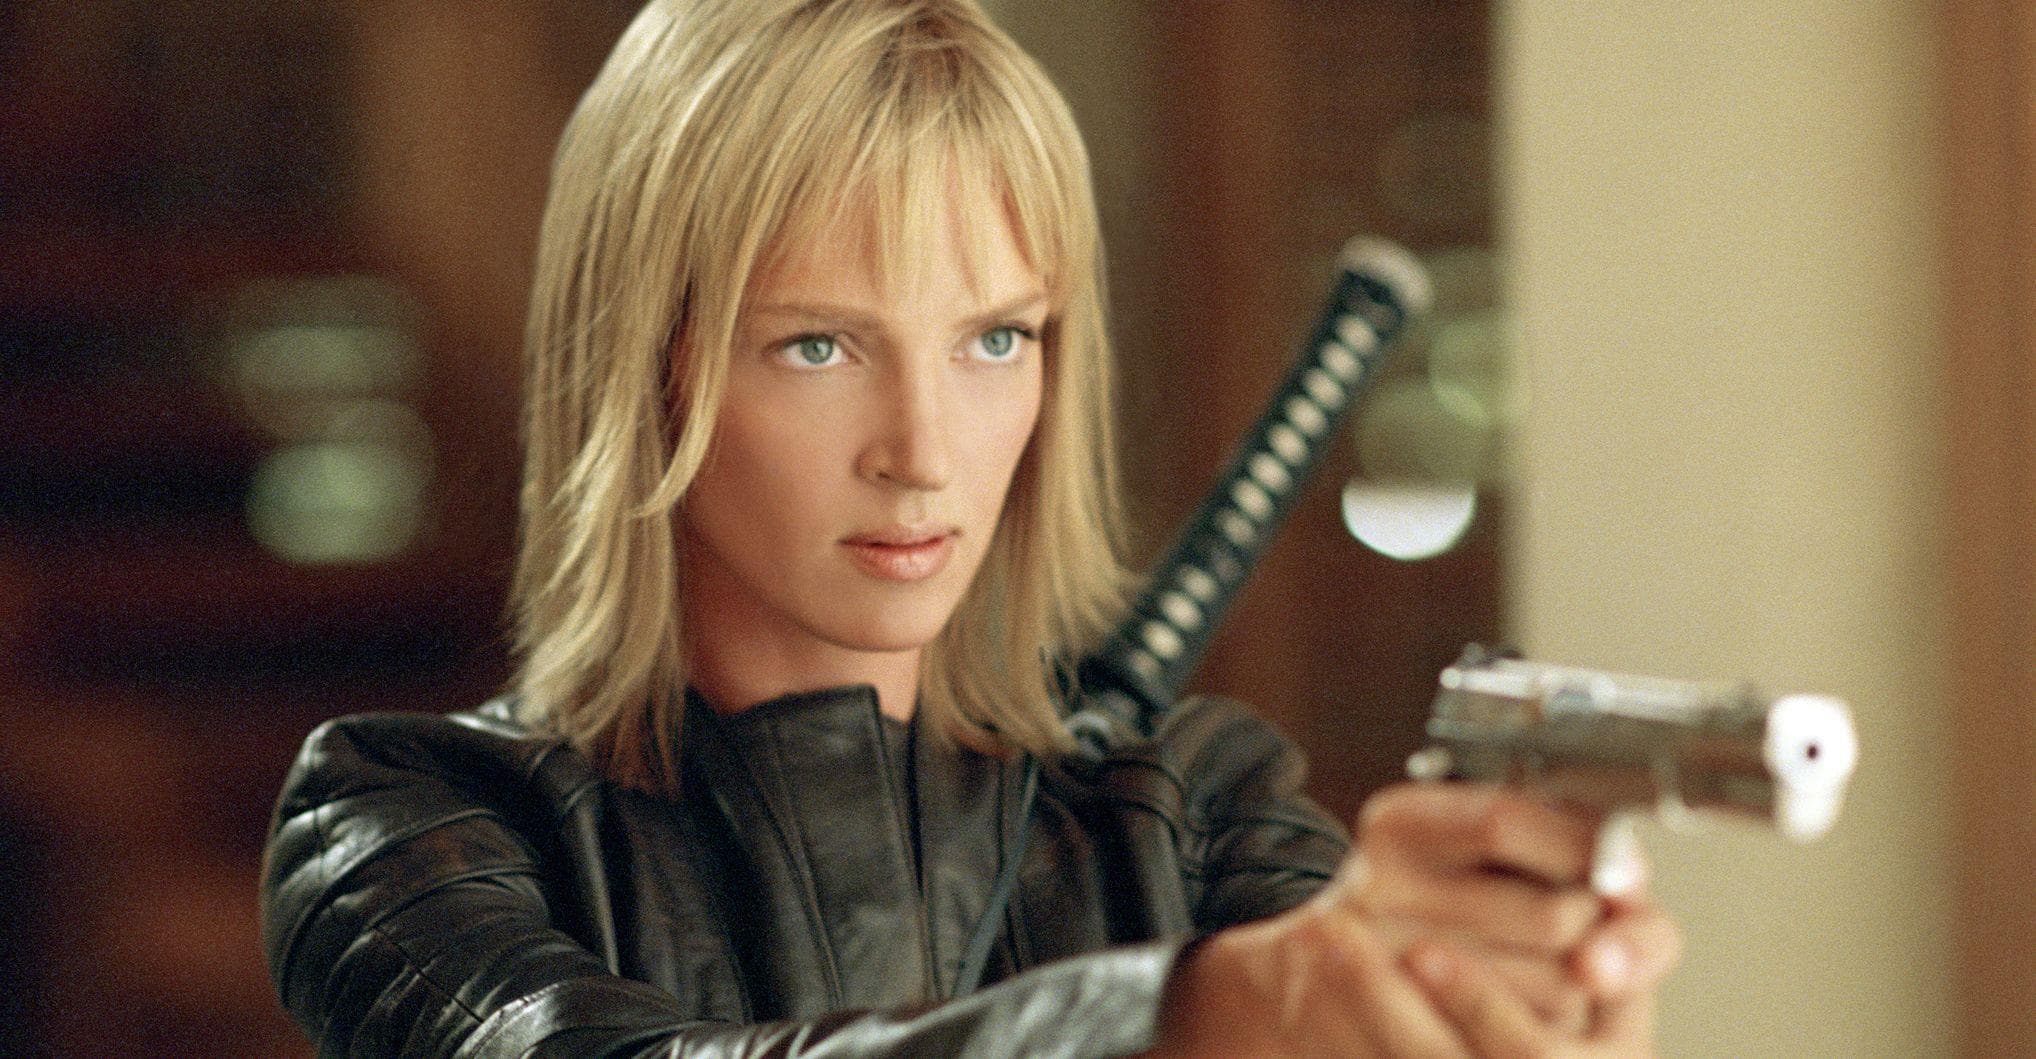 The Best Action Movies With Female Leads Ranked By Fans